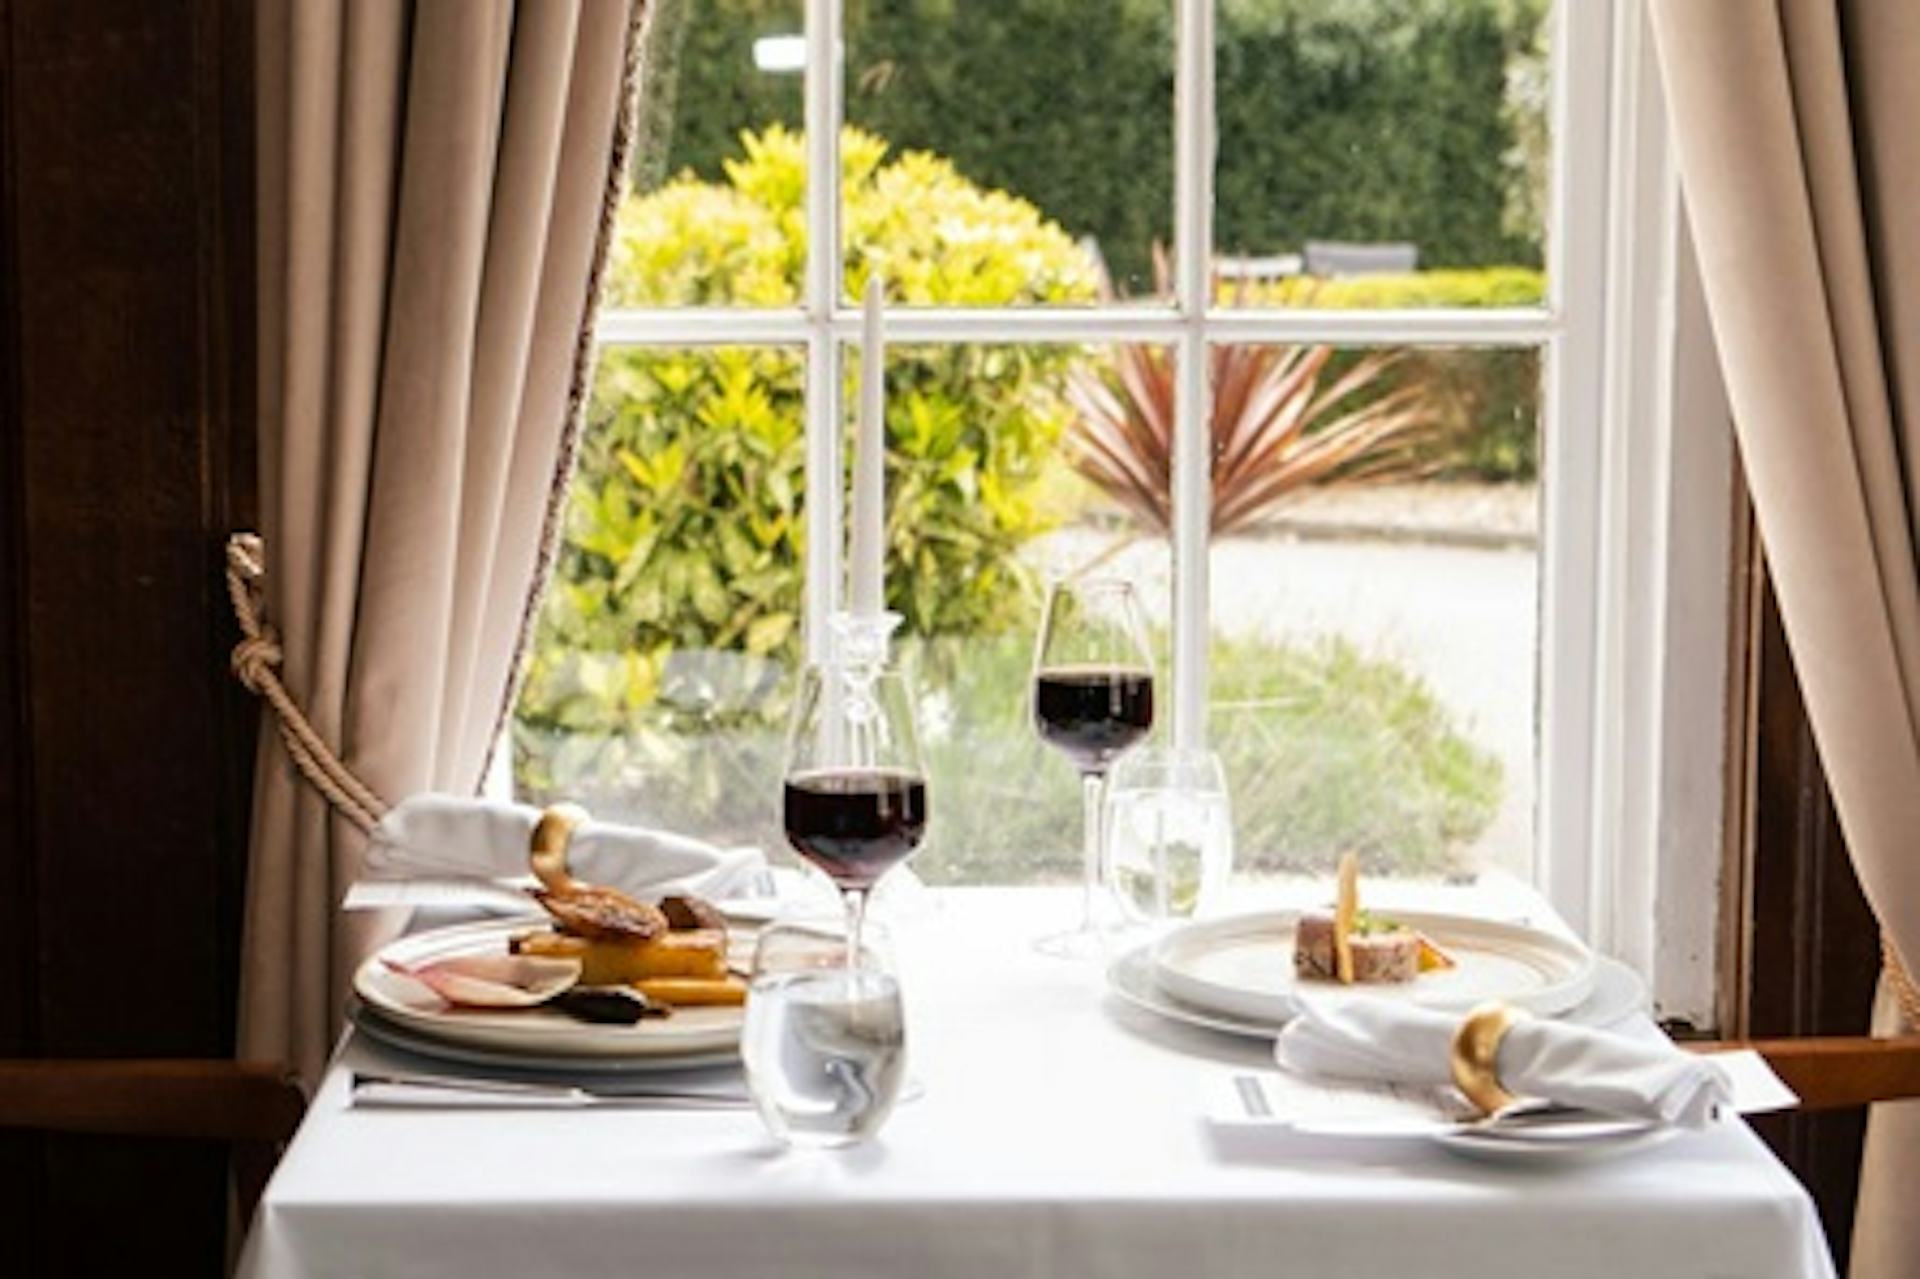 One Night Break with Dinner for Two at The Burnham Beeches Hotel